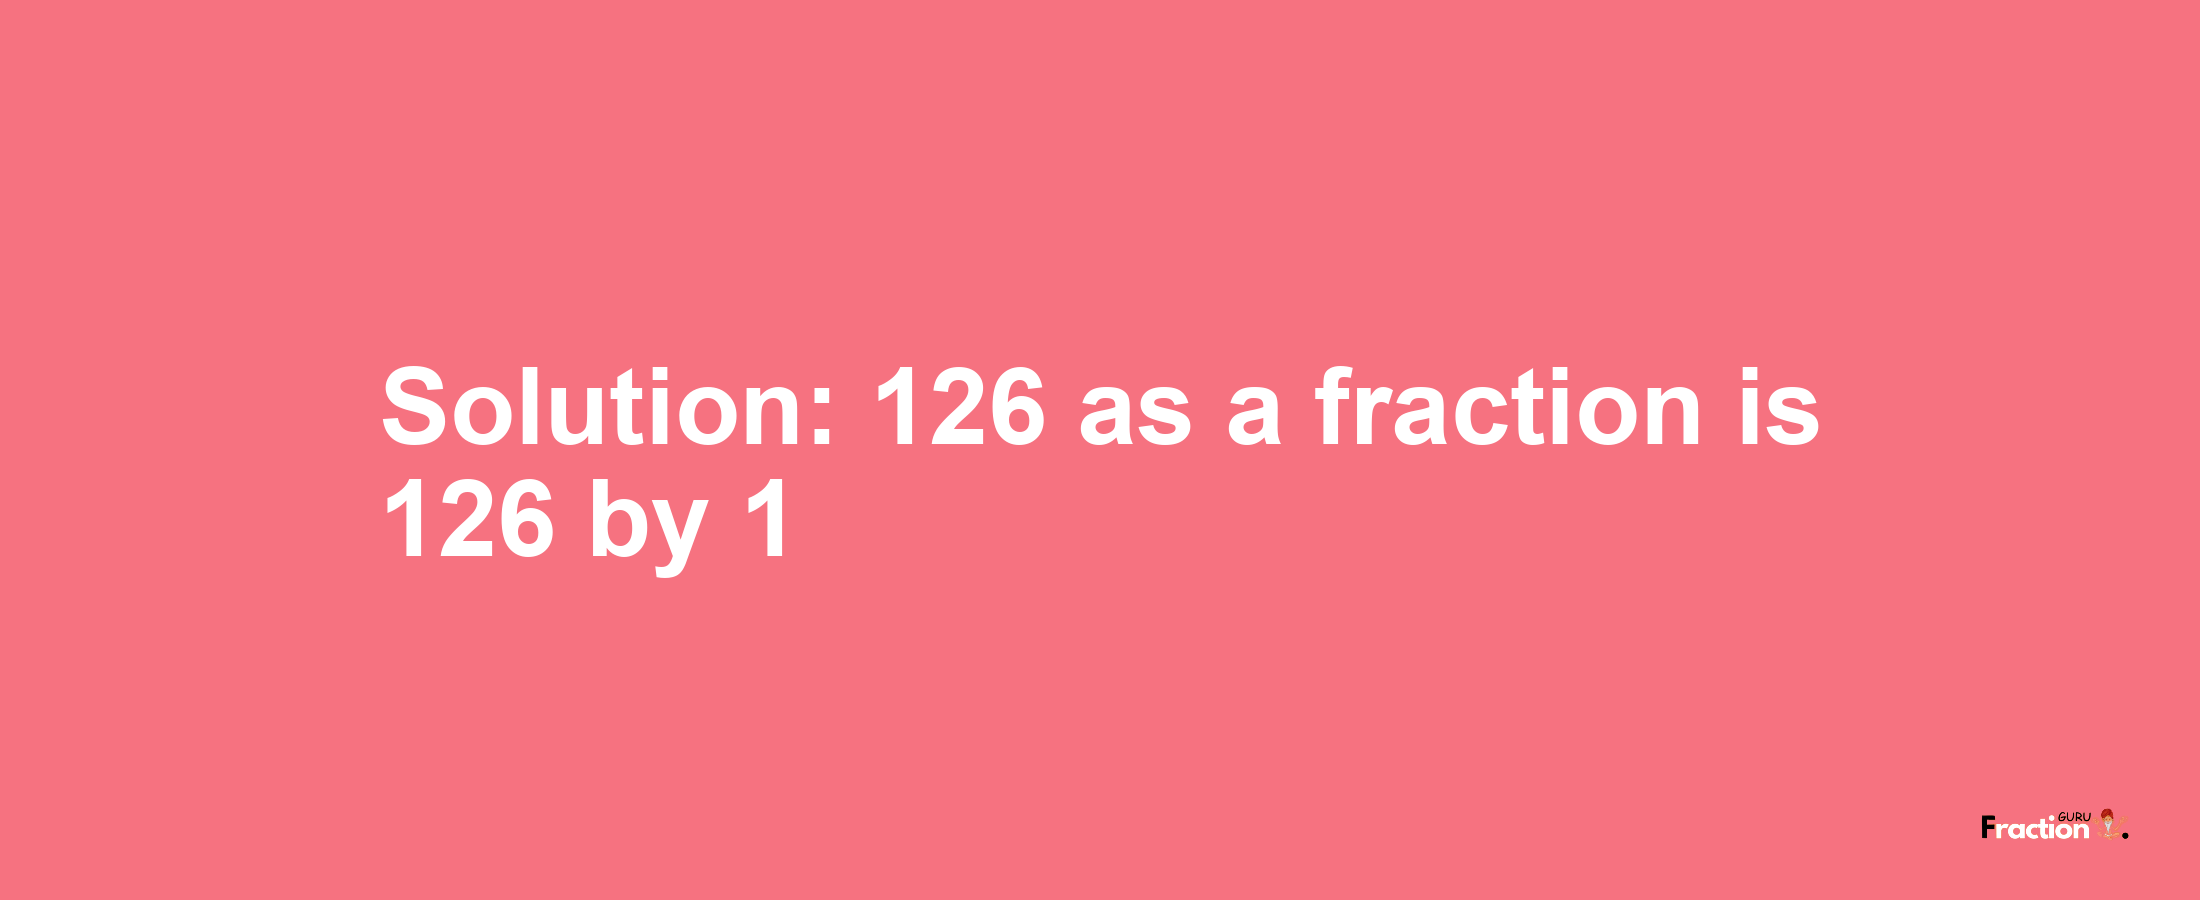 Solution:126 as a fraction is 126/1